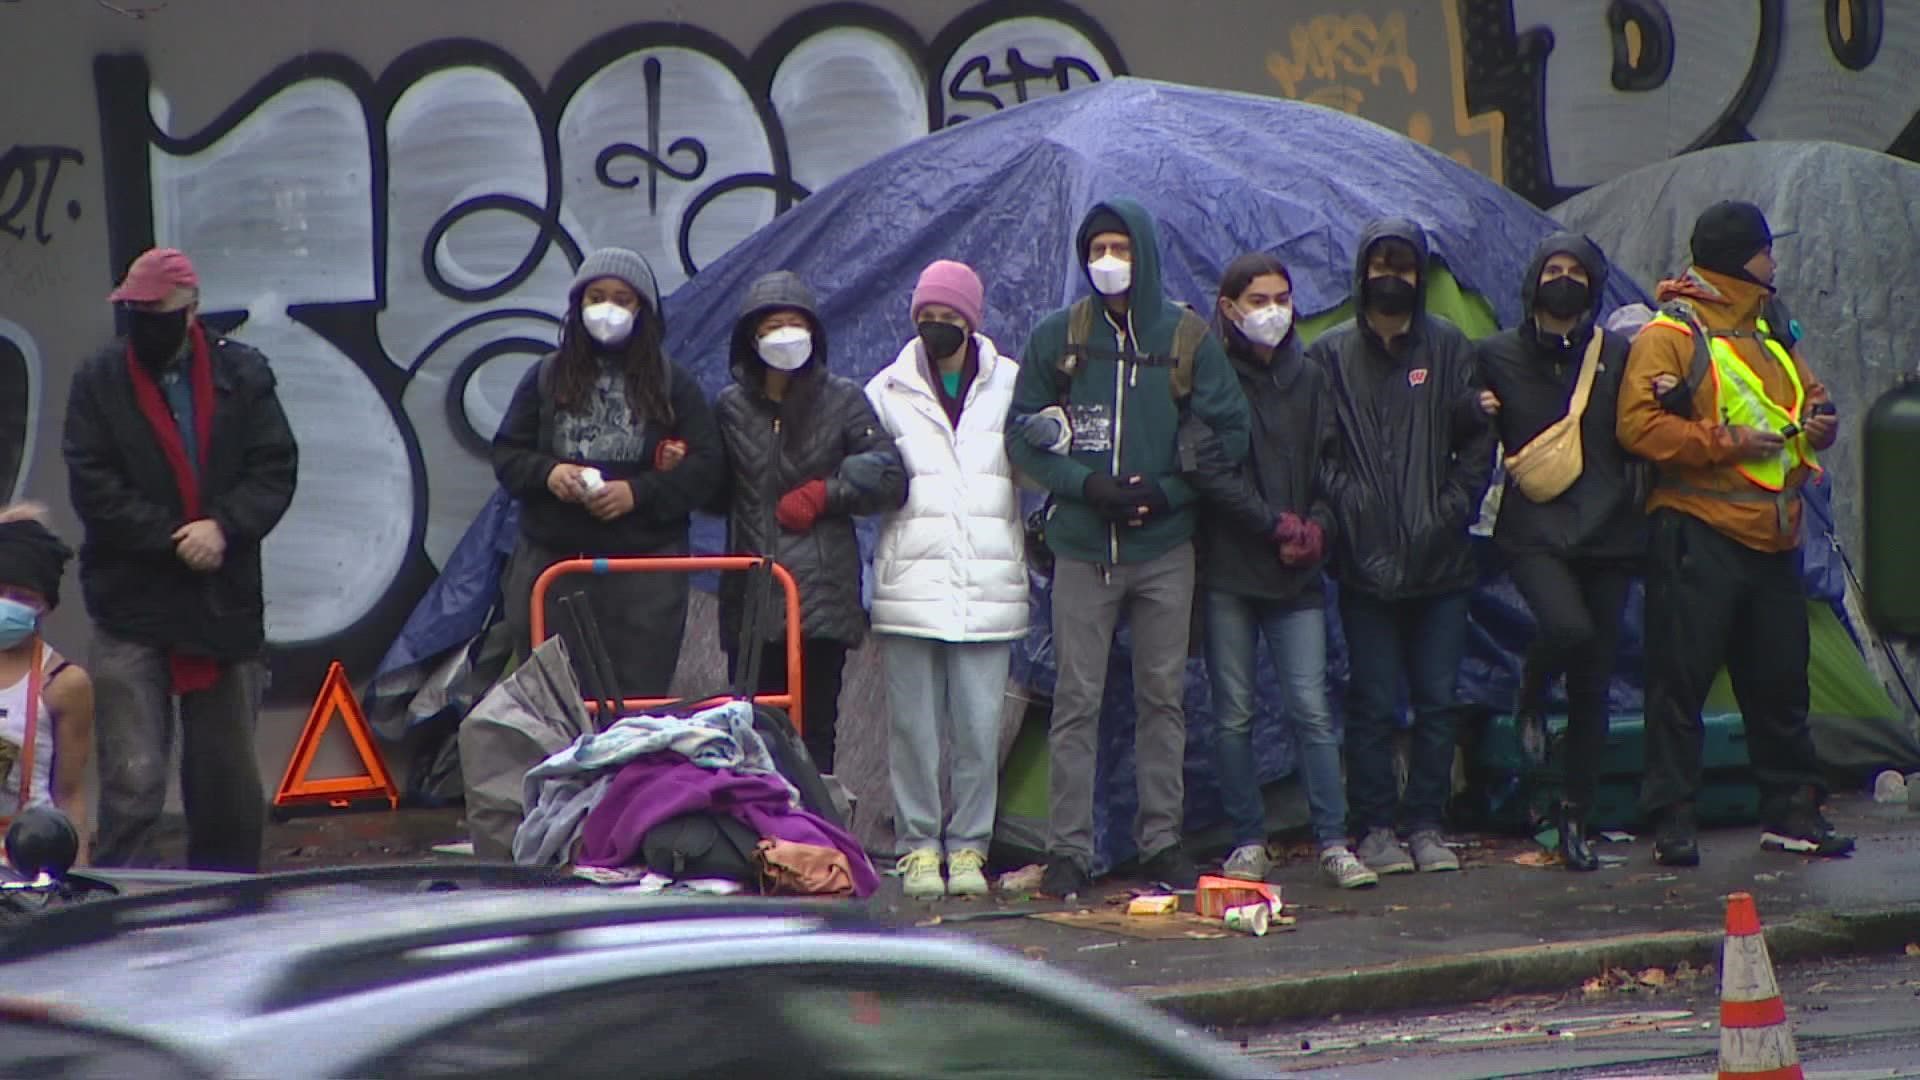 Protestors are trying to prevent city crews from sweeping a homeless encampment across the street from Seattle City Hall.